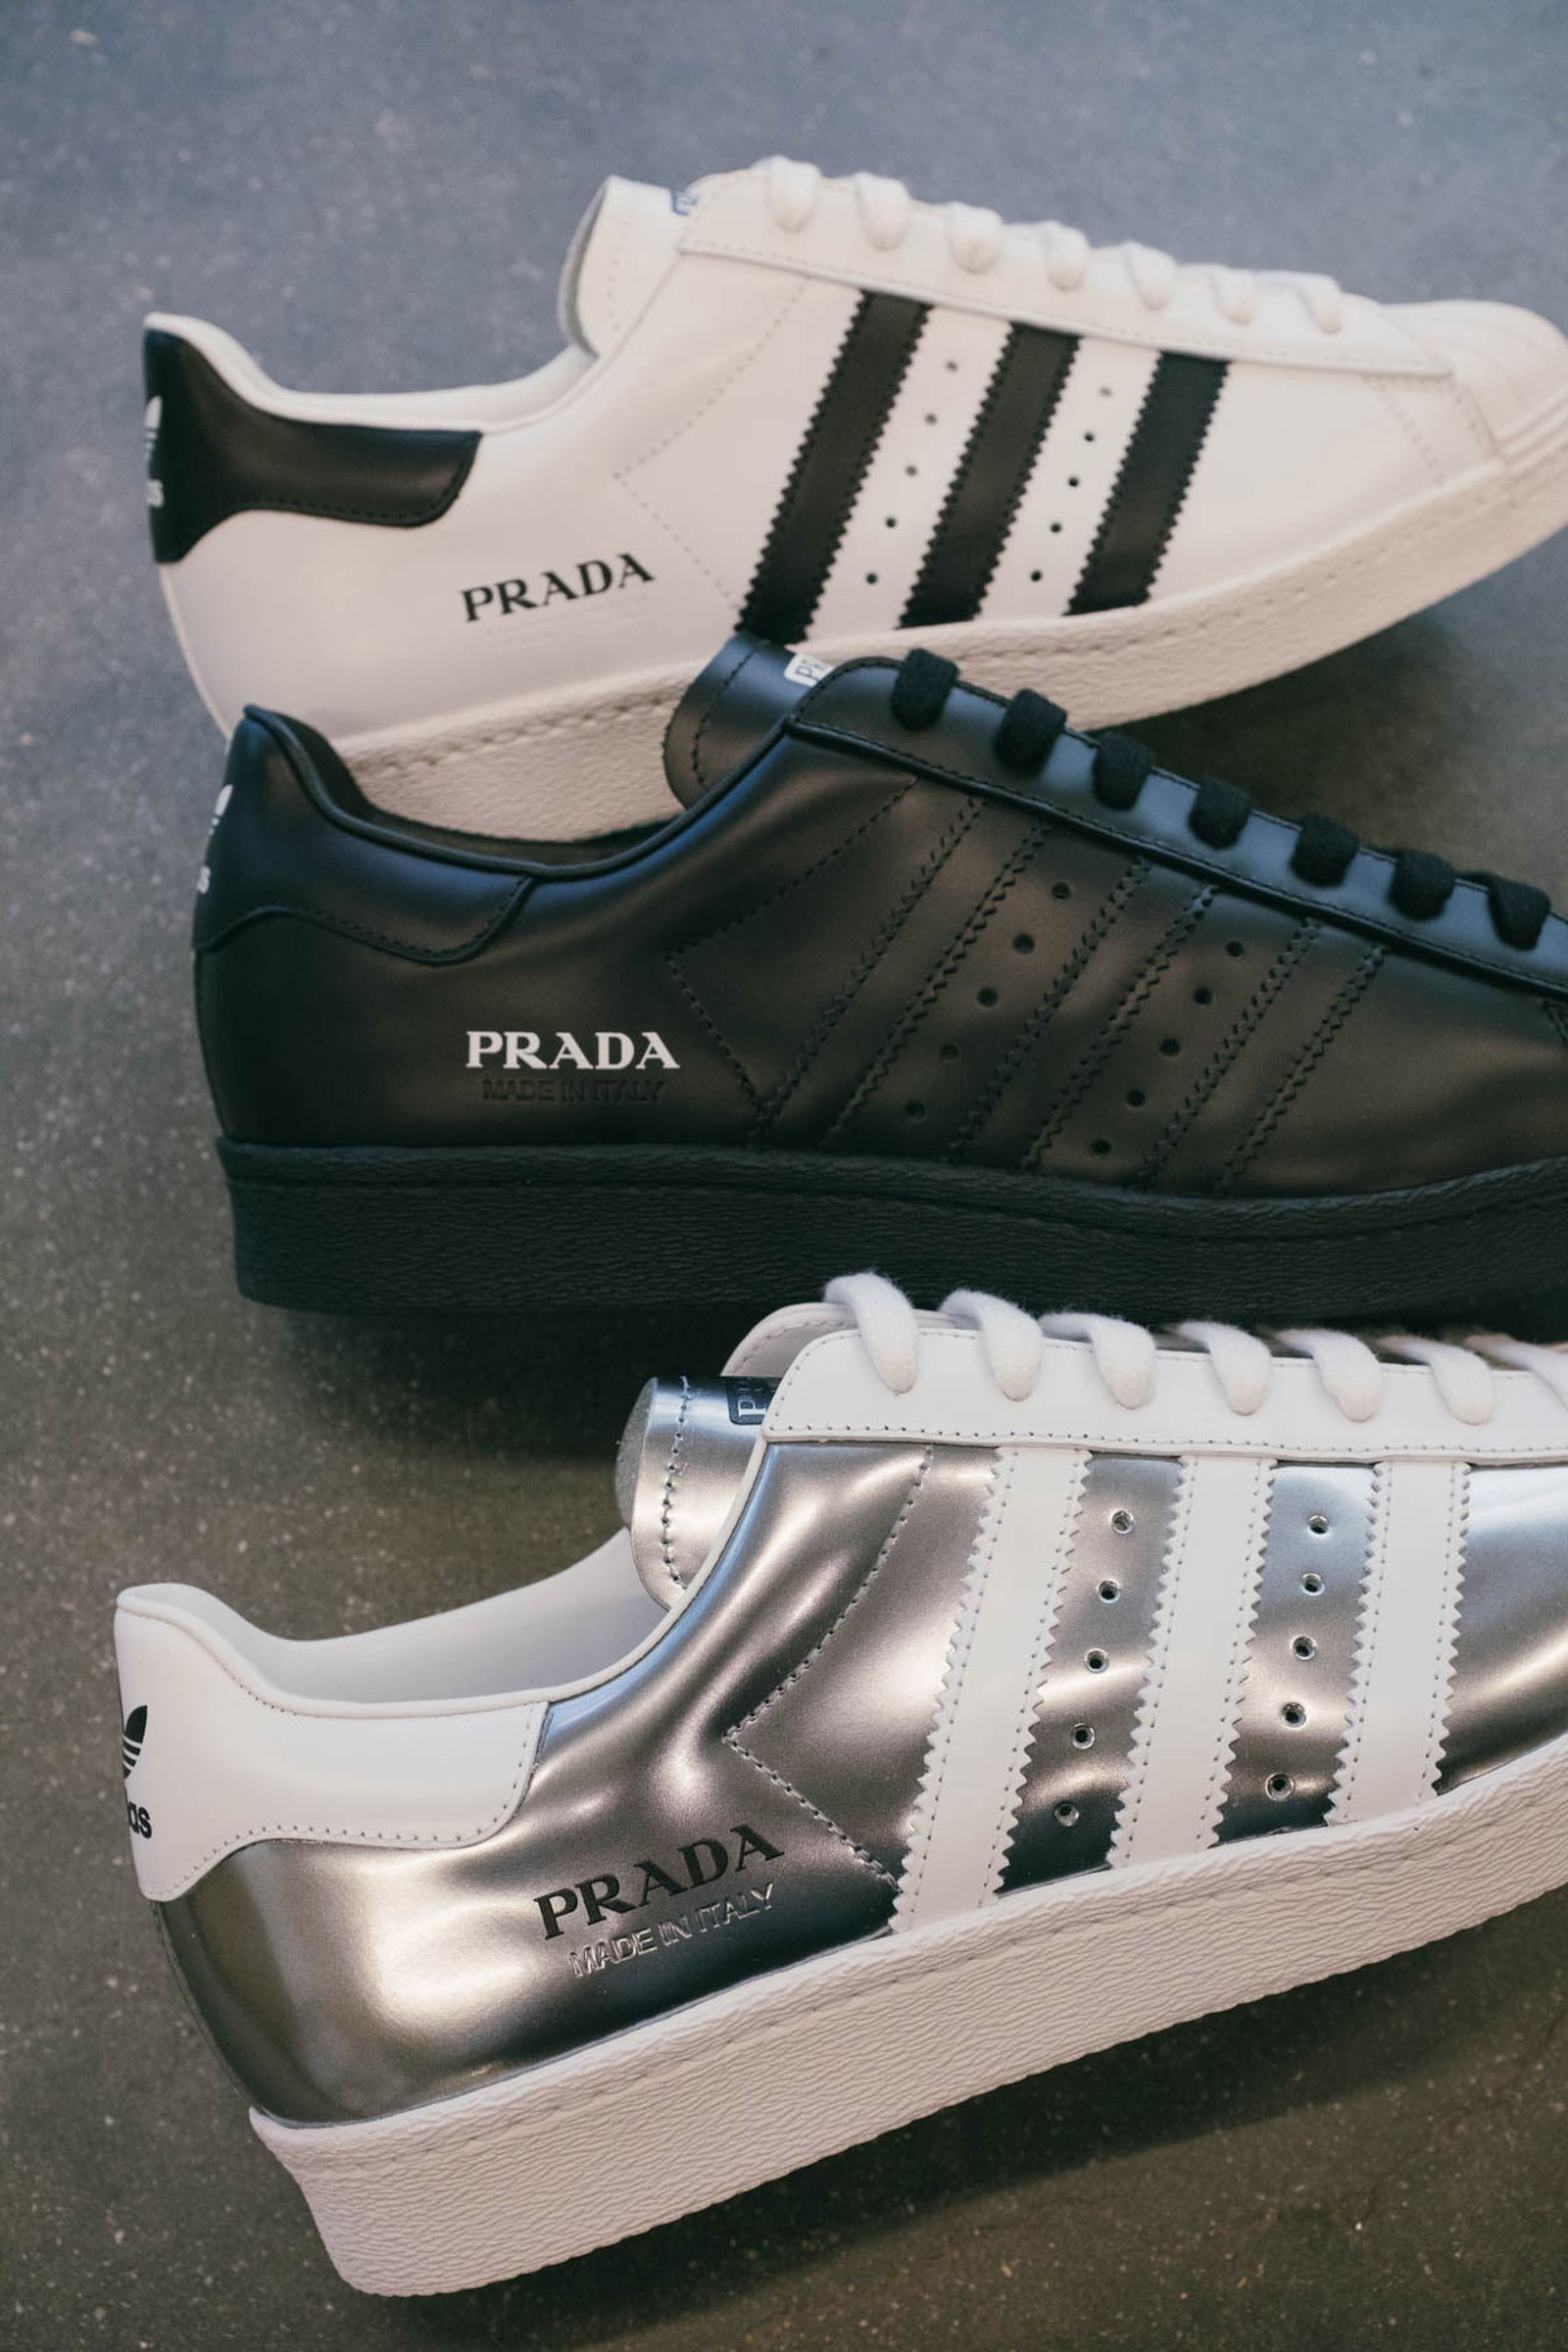 ambiente estéreo ingresos Why the Prada x adidas Superstar Costs $500 & We're Not Mad At It